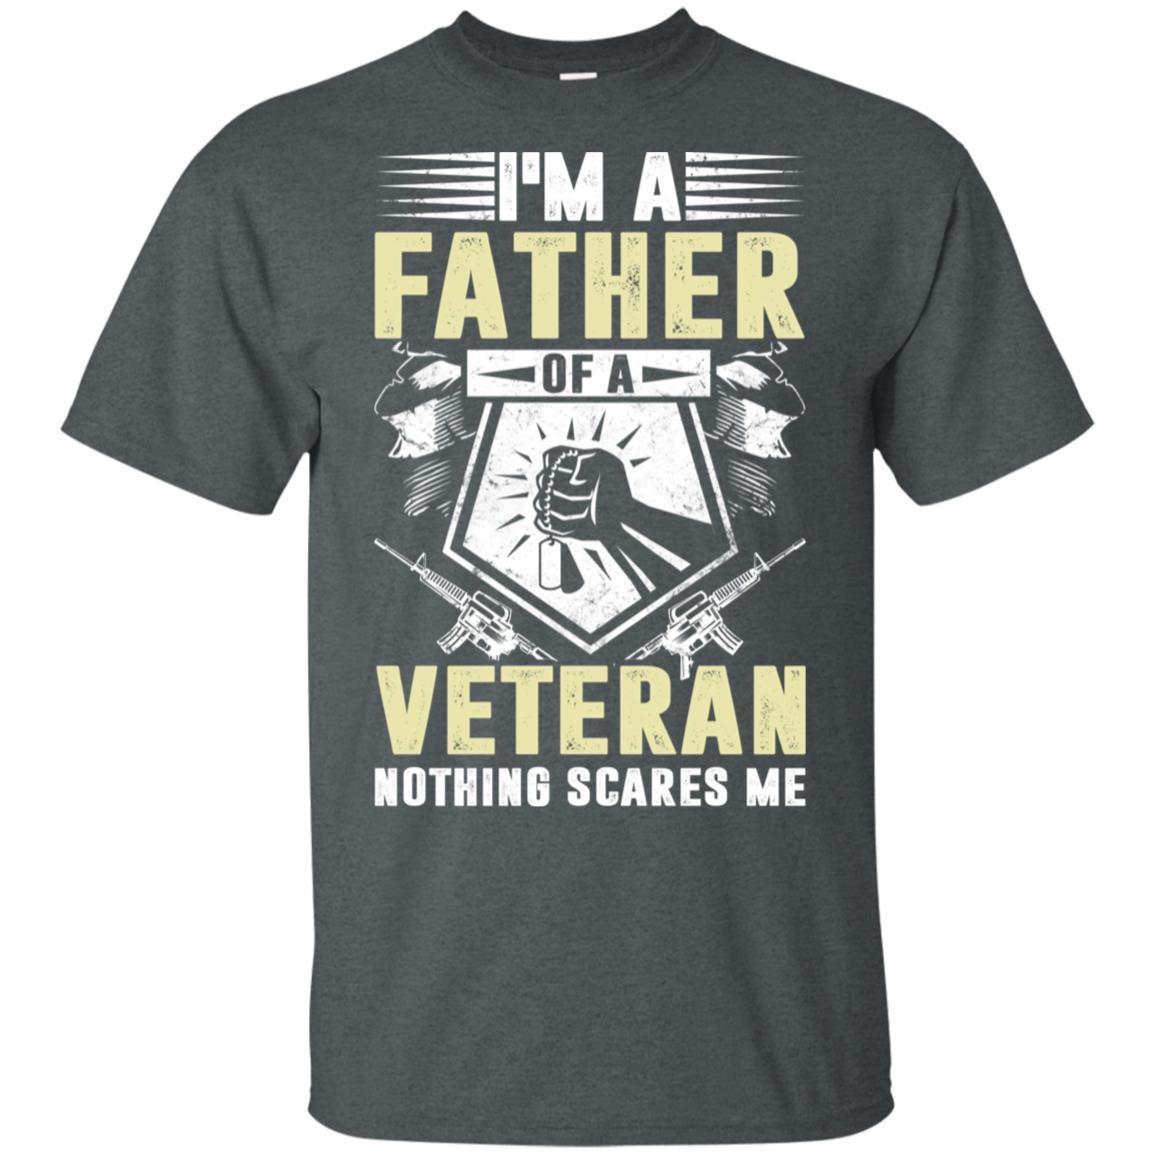 Military T-Shirt "I'M A FATHER OF A VETERAN NOTHING SCARES ME On" Front-TShirt-General-Veterans Nation